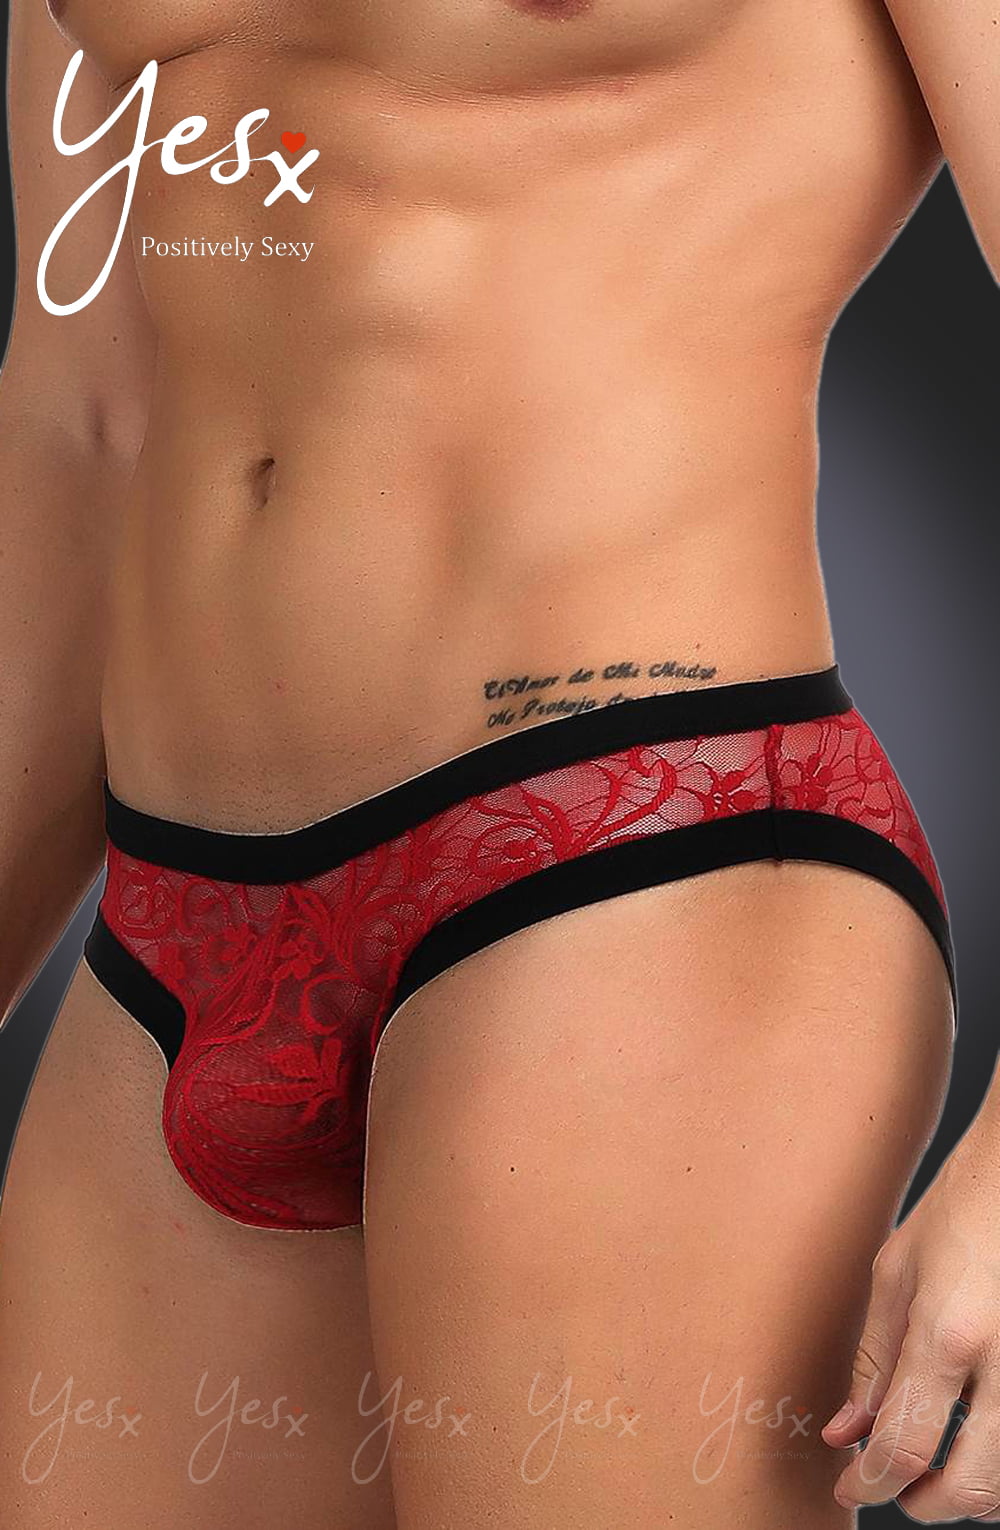 YesX YX974 Men's Sheer Lace Brief in Red/Black - Sexy & Stylish